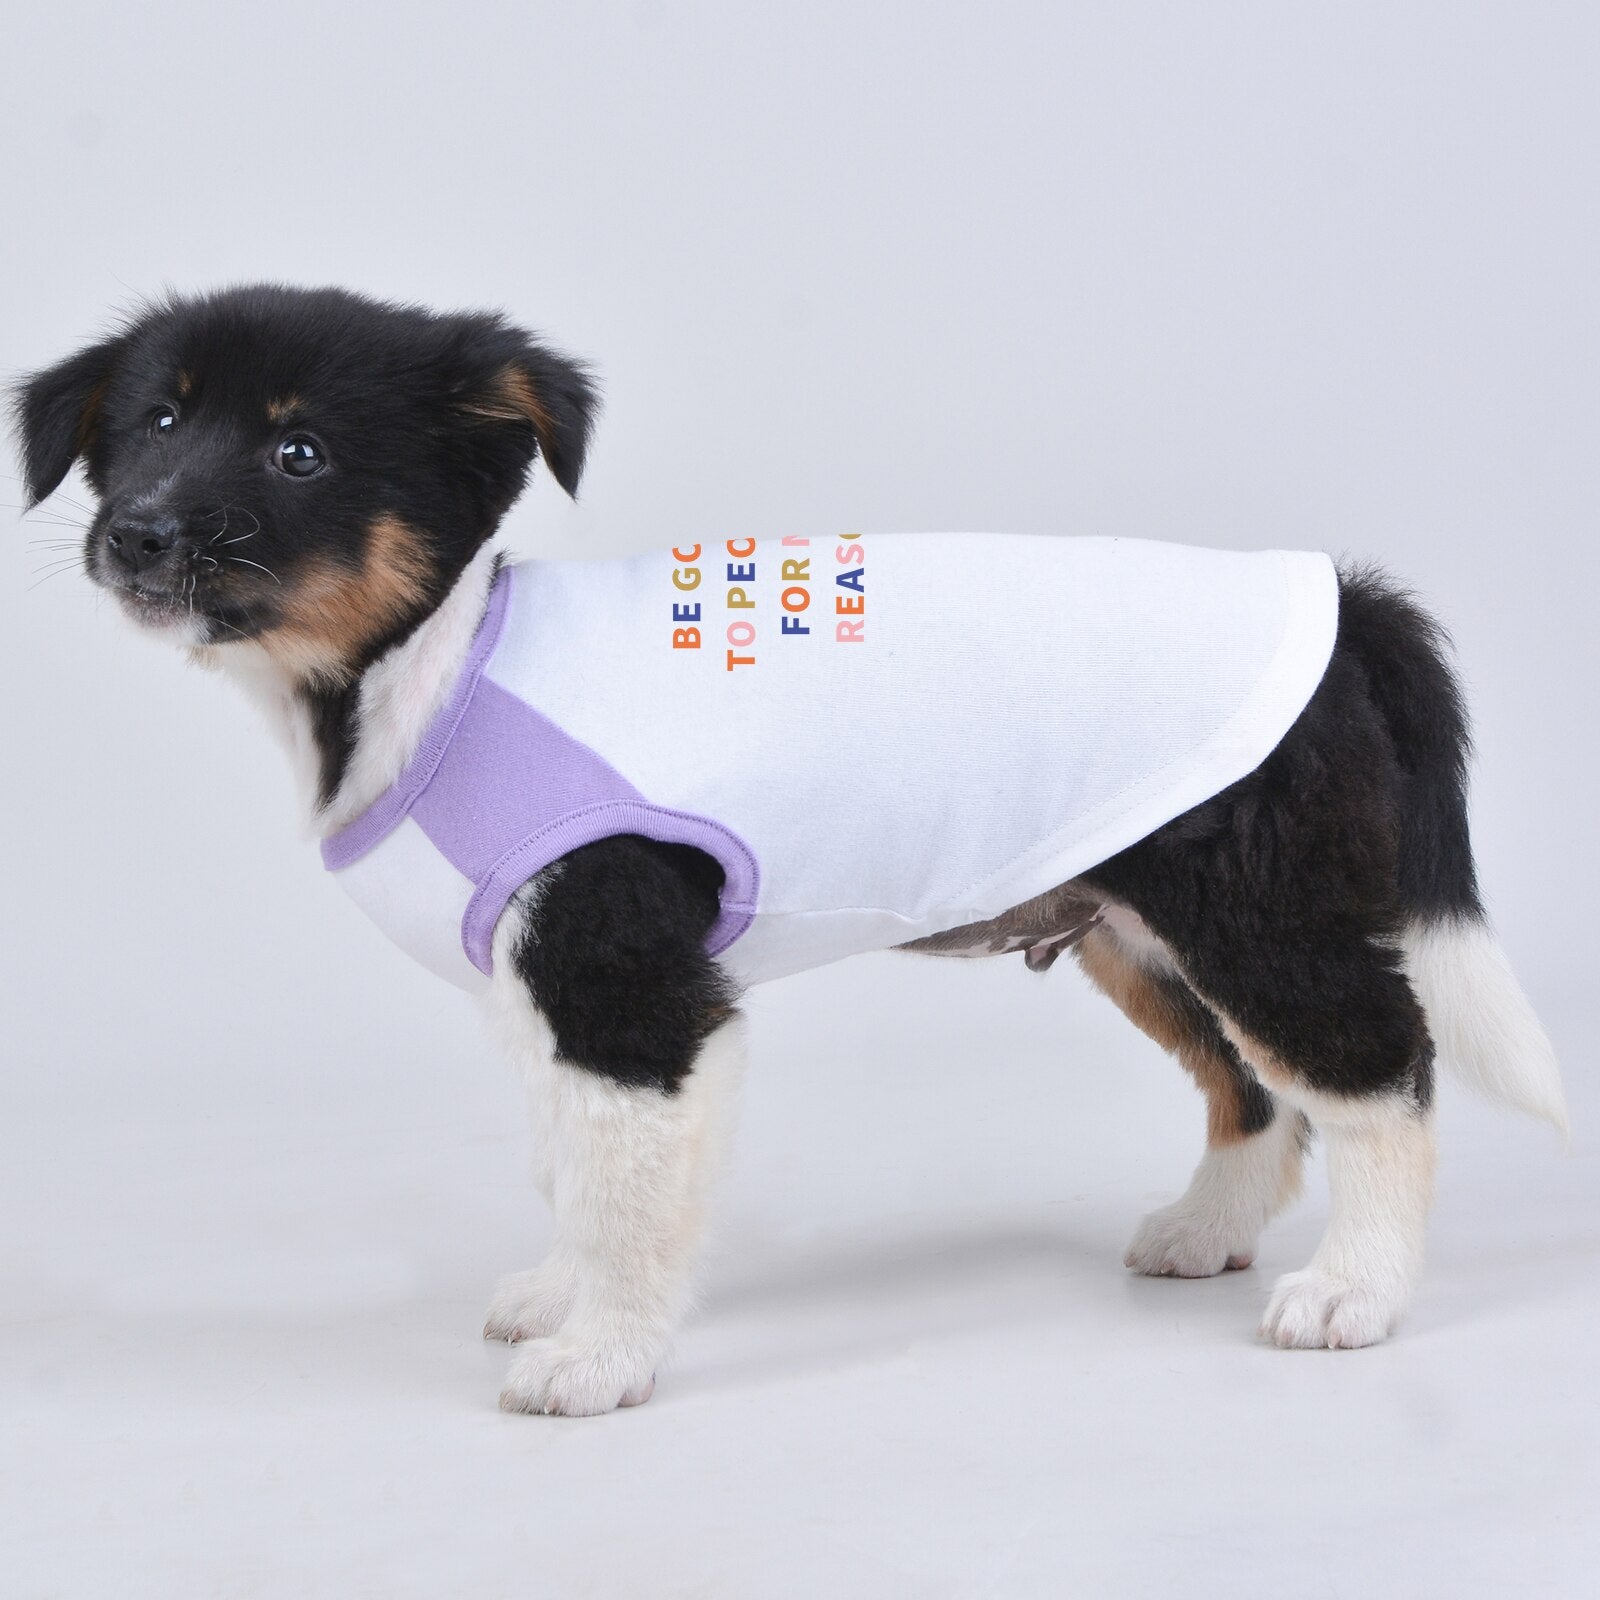 Printed Dog Clothes Sleveless Tshirt Vest Summer for Pets in All Sizes and Ages, Fine Breathable Fabric and High Quality